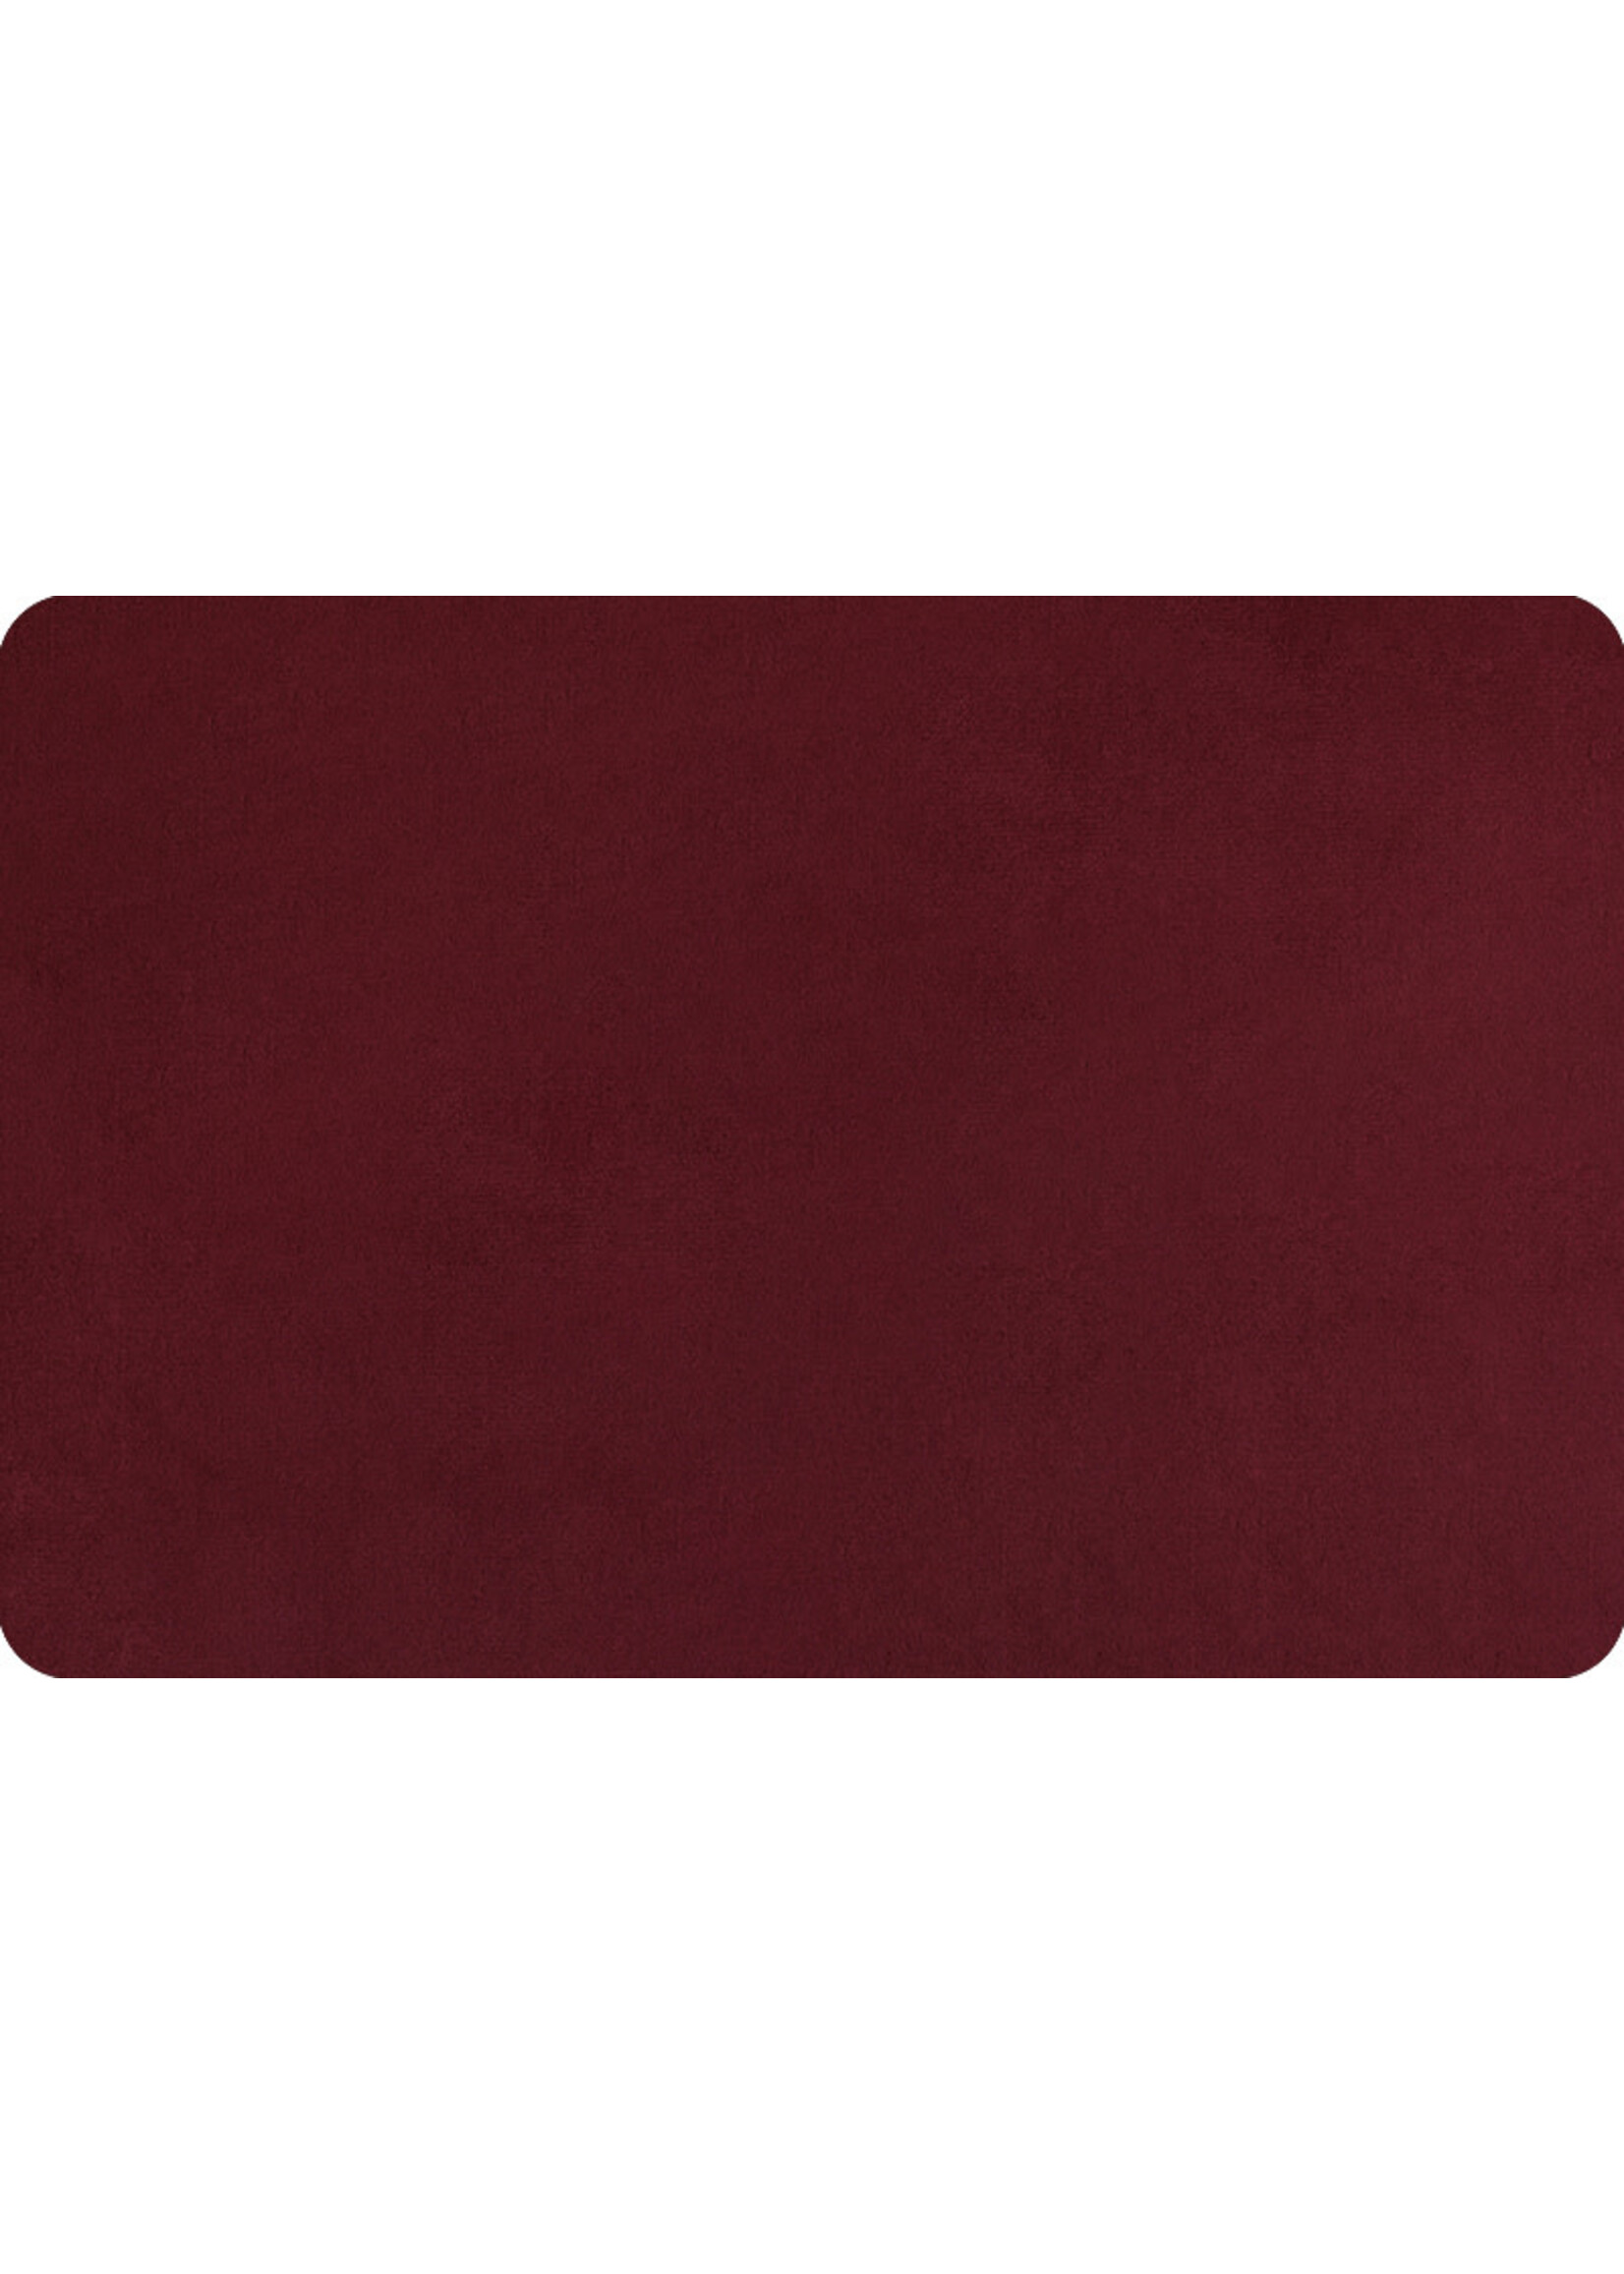 Shannon Fabrics Minky, Extra Wide Solid Cuddle3, 90" Merlot, (by the inch)